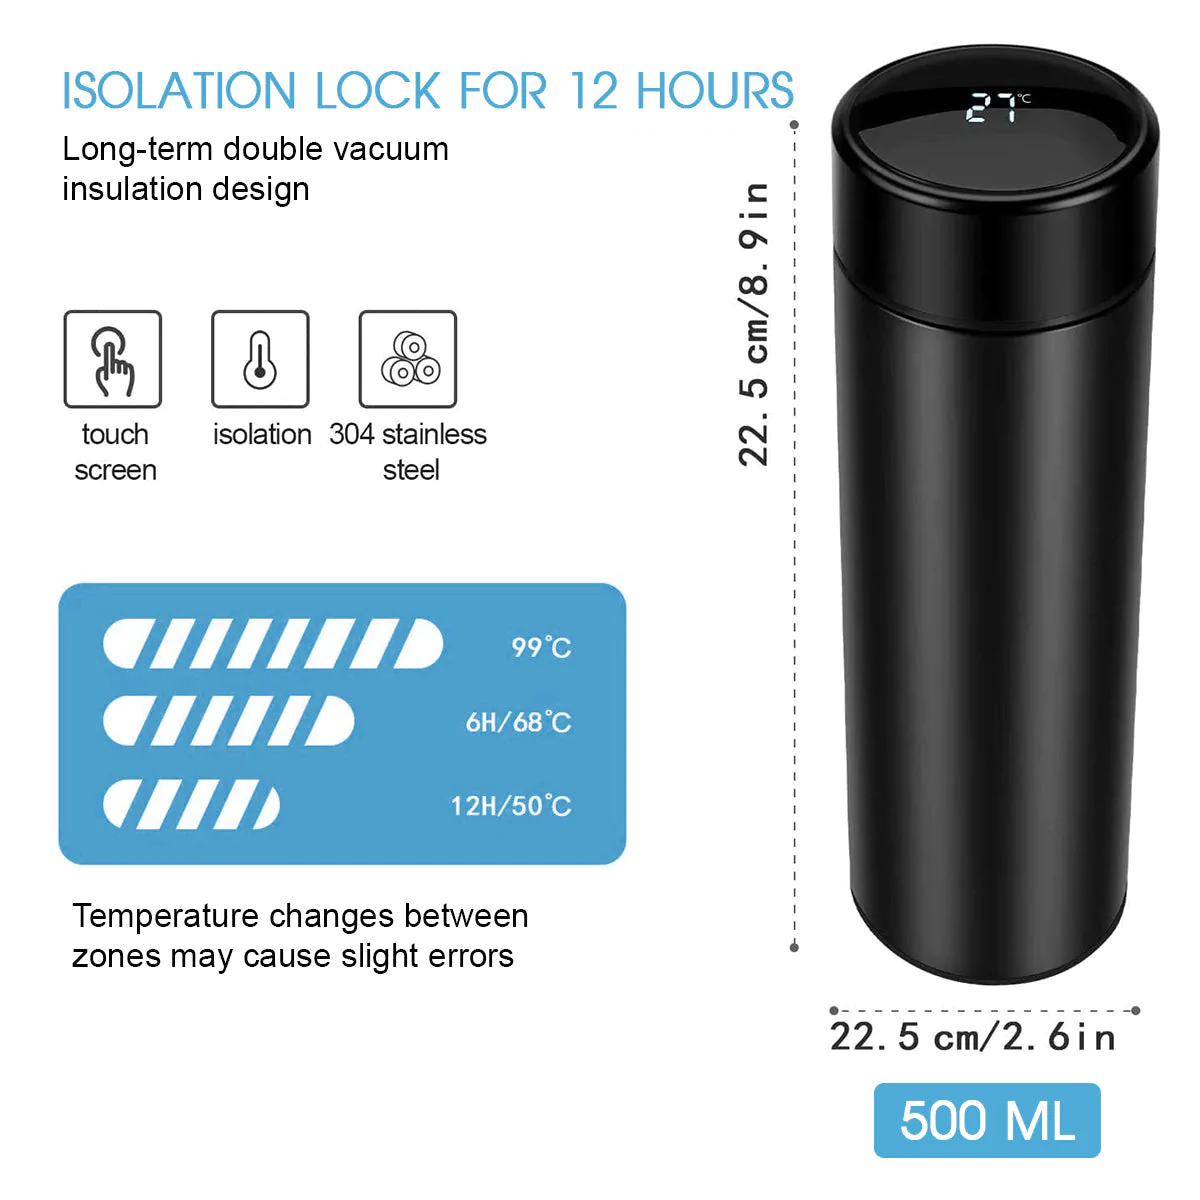 Custom Text and Logo 17oz Insulated Water Bottle with LED Temperature Display, Compatible with Land Rover, Coffee Tea Infuser Bottle Double Wall Vacuum Insulated Water Bottle for Hot or Cold Drink - Delicate Leather